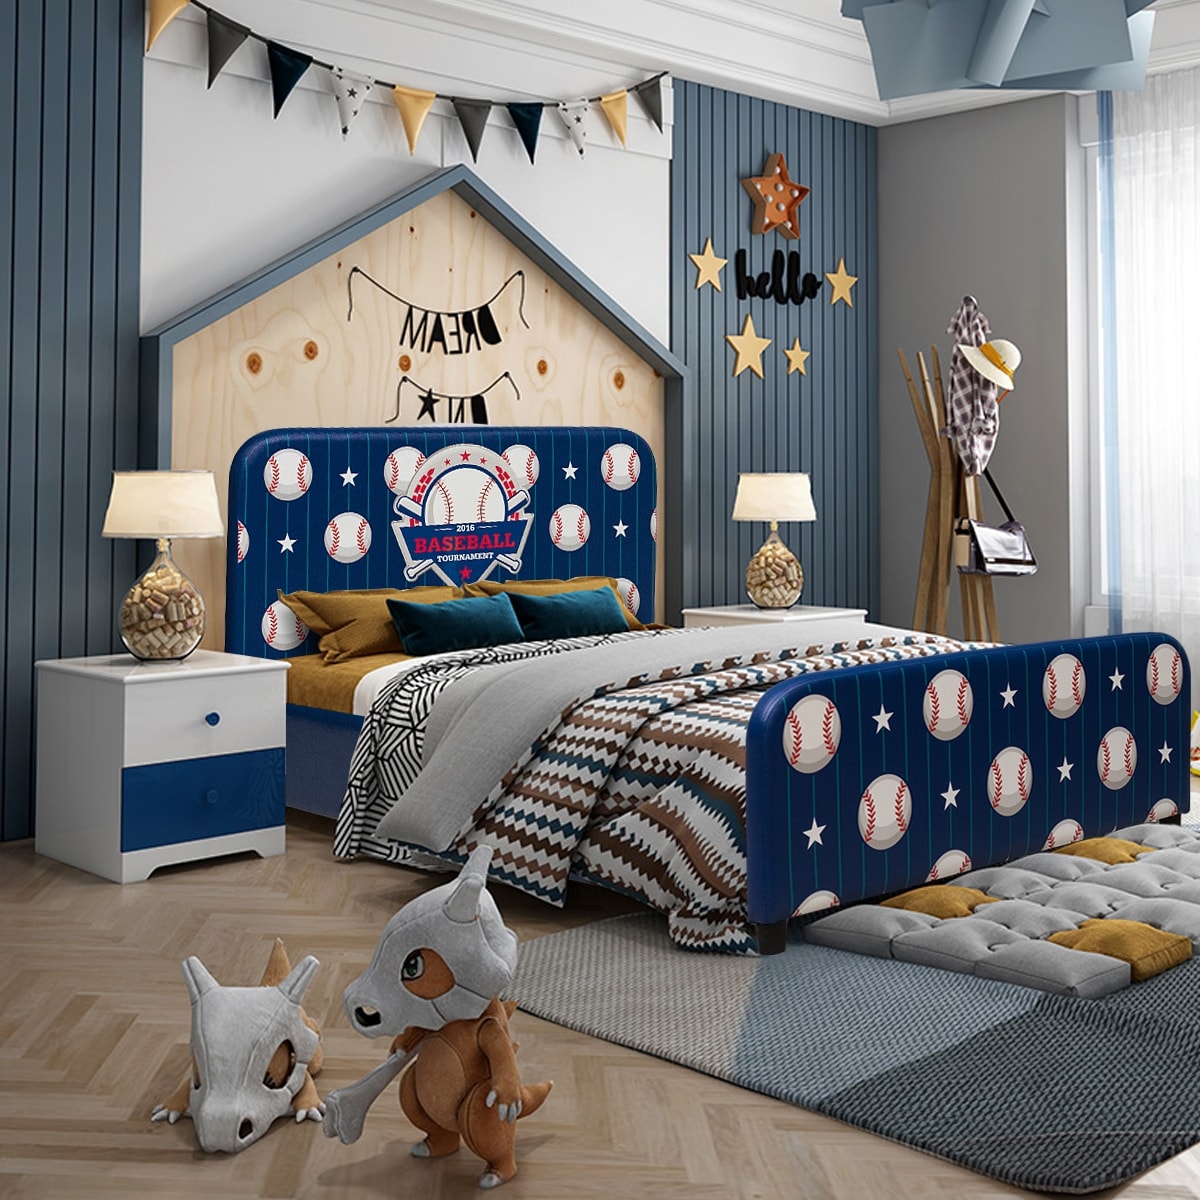 youth boy bedroom furniture